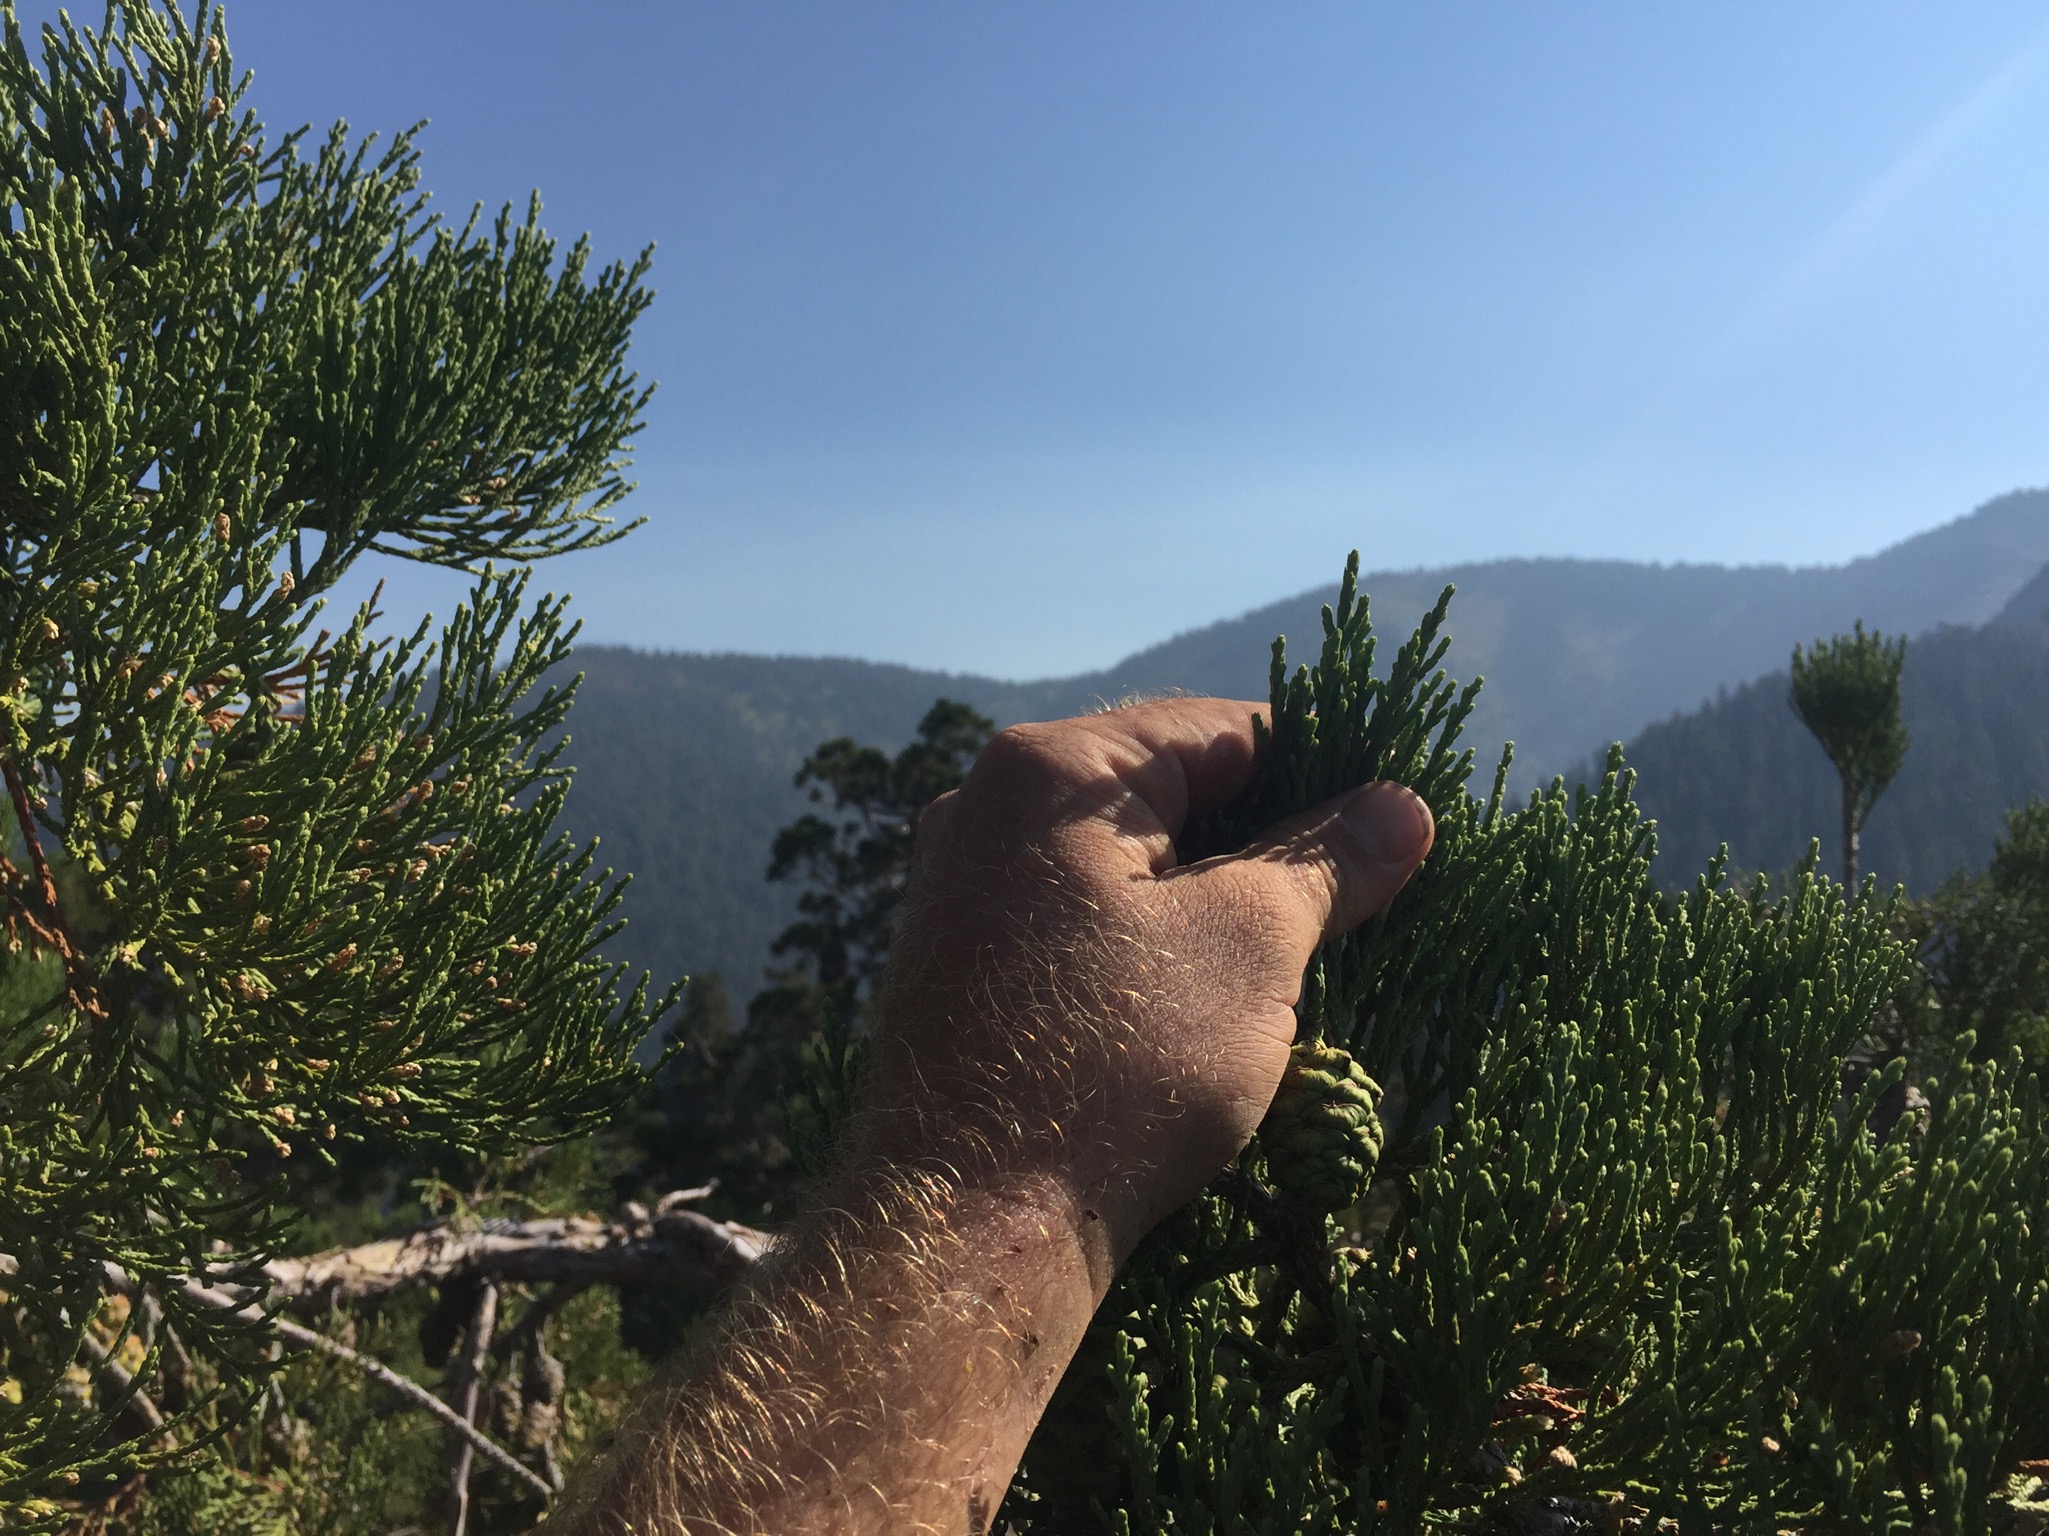 5. Here is a view at the very top of a sequoia. The tip material is what is needed back at the laboratory to create new trees.